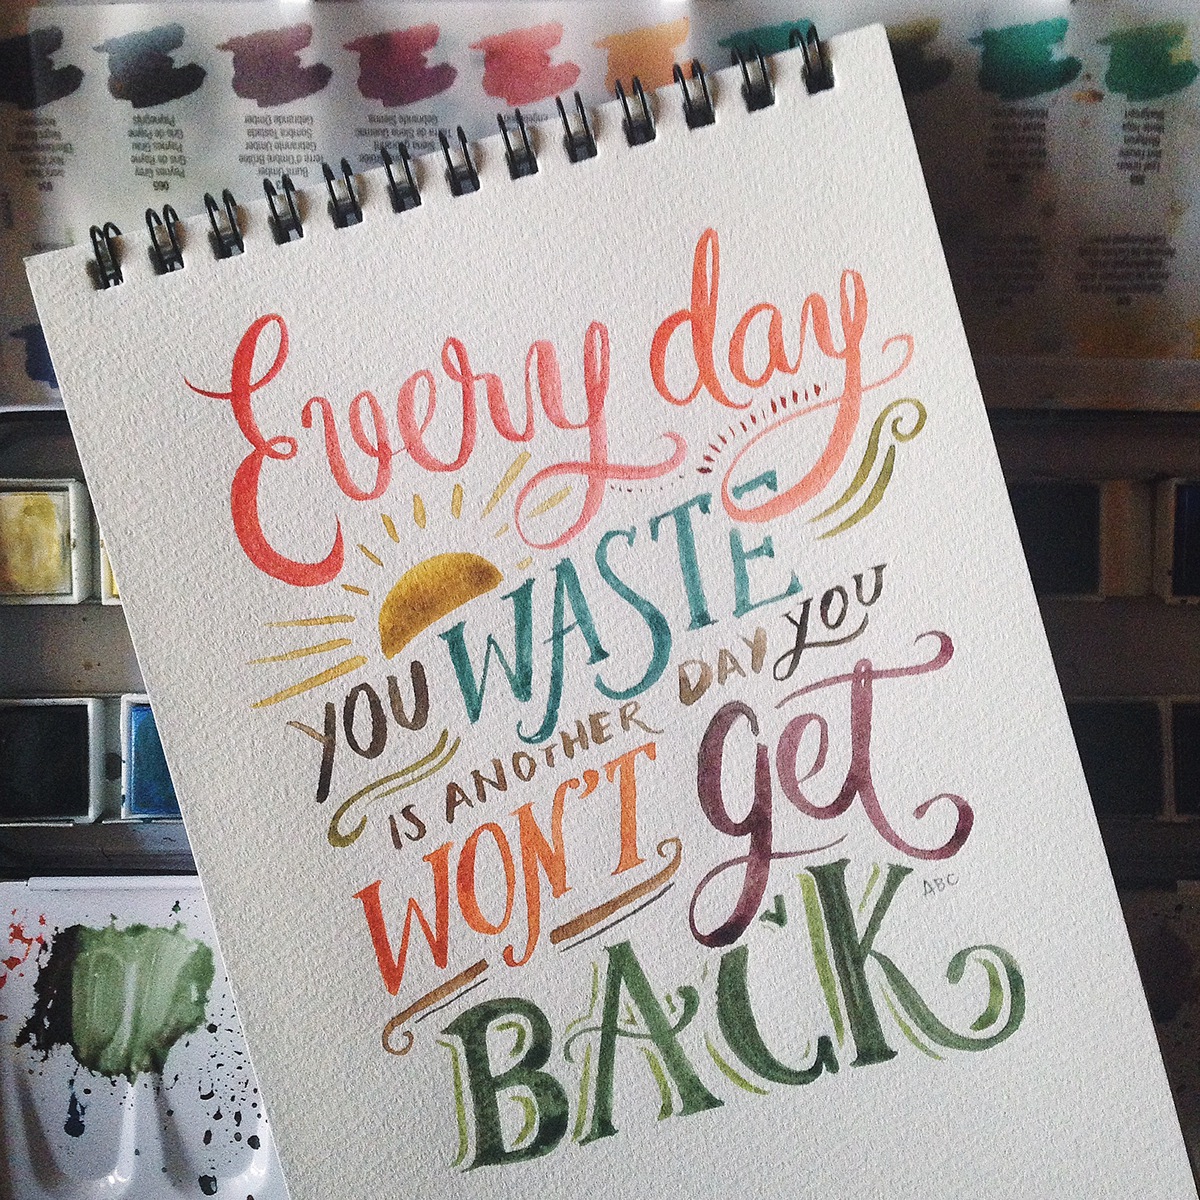 art watercolor lettering Quotes motivation ABC abbey sy Hand Lettered inspiration sketch traditional mess creative Creativity passion